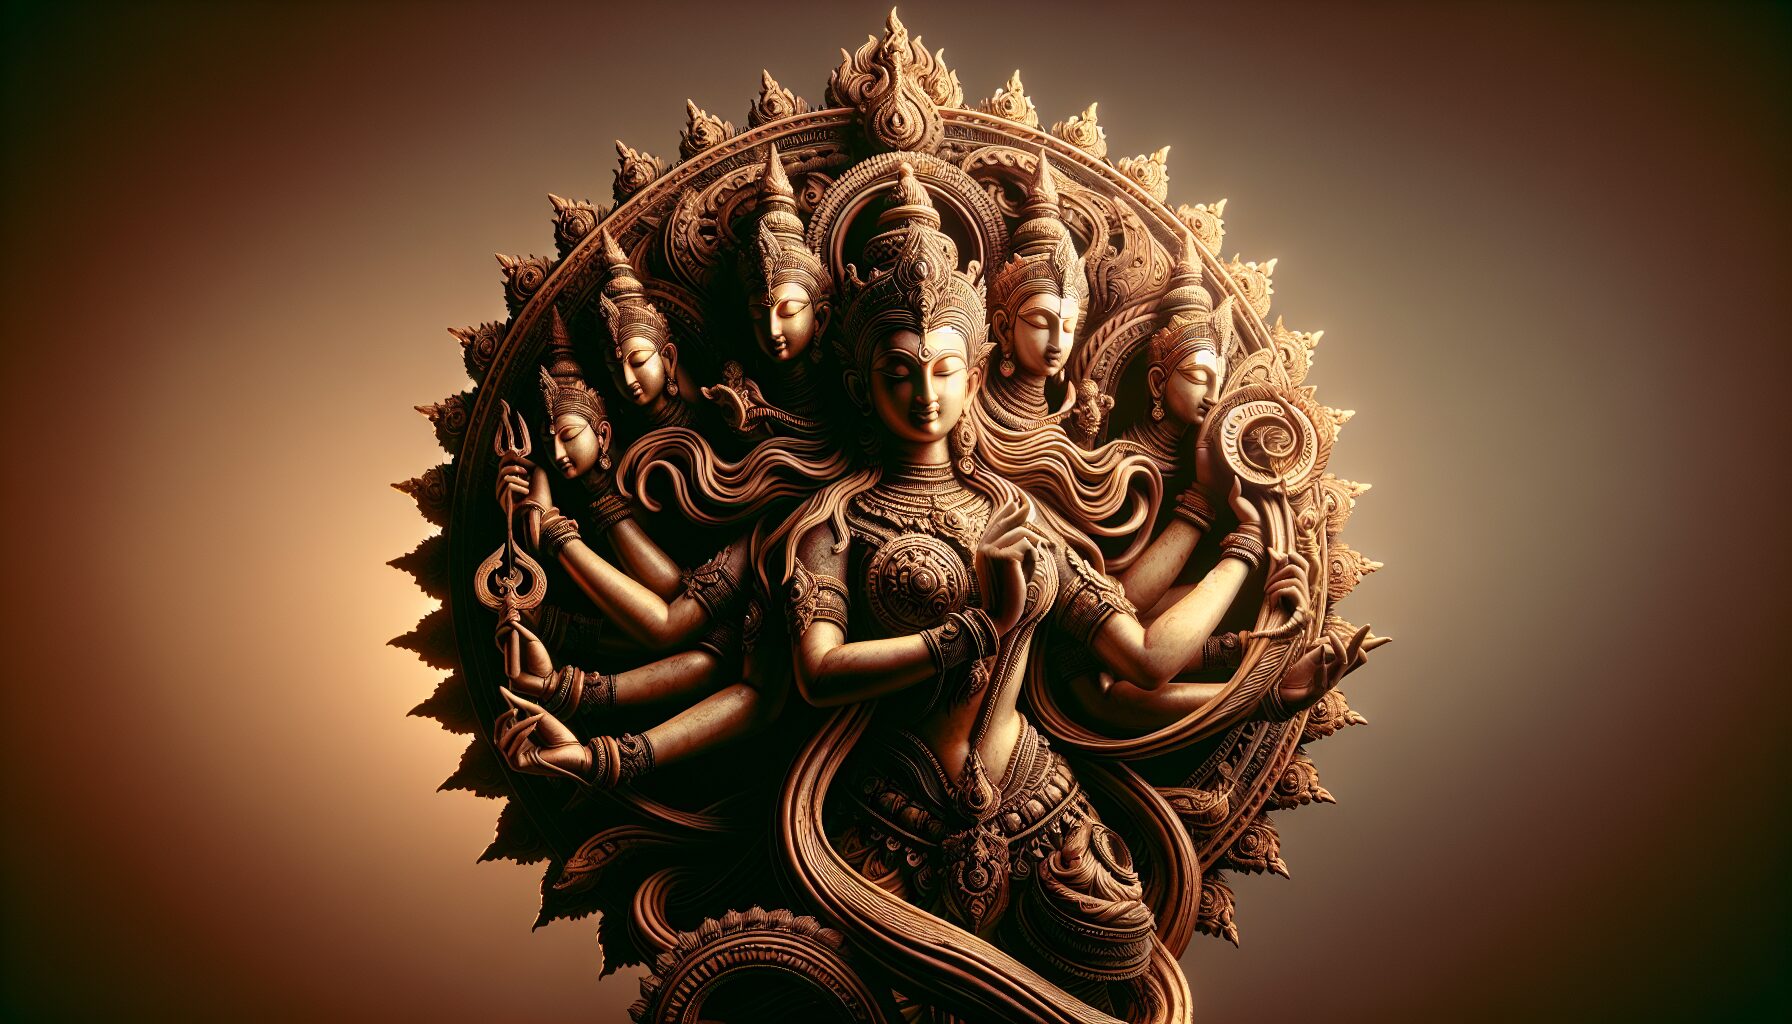 What Are The Origins Of Hindu Gods And Goddesses?